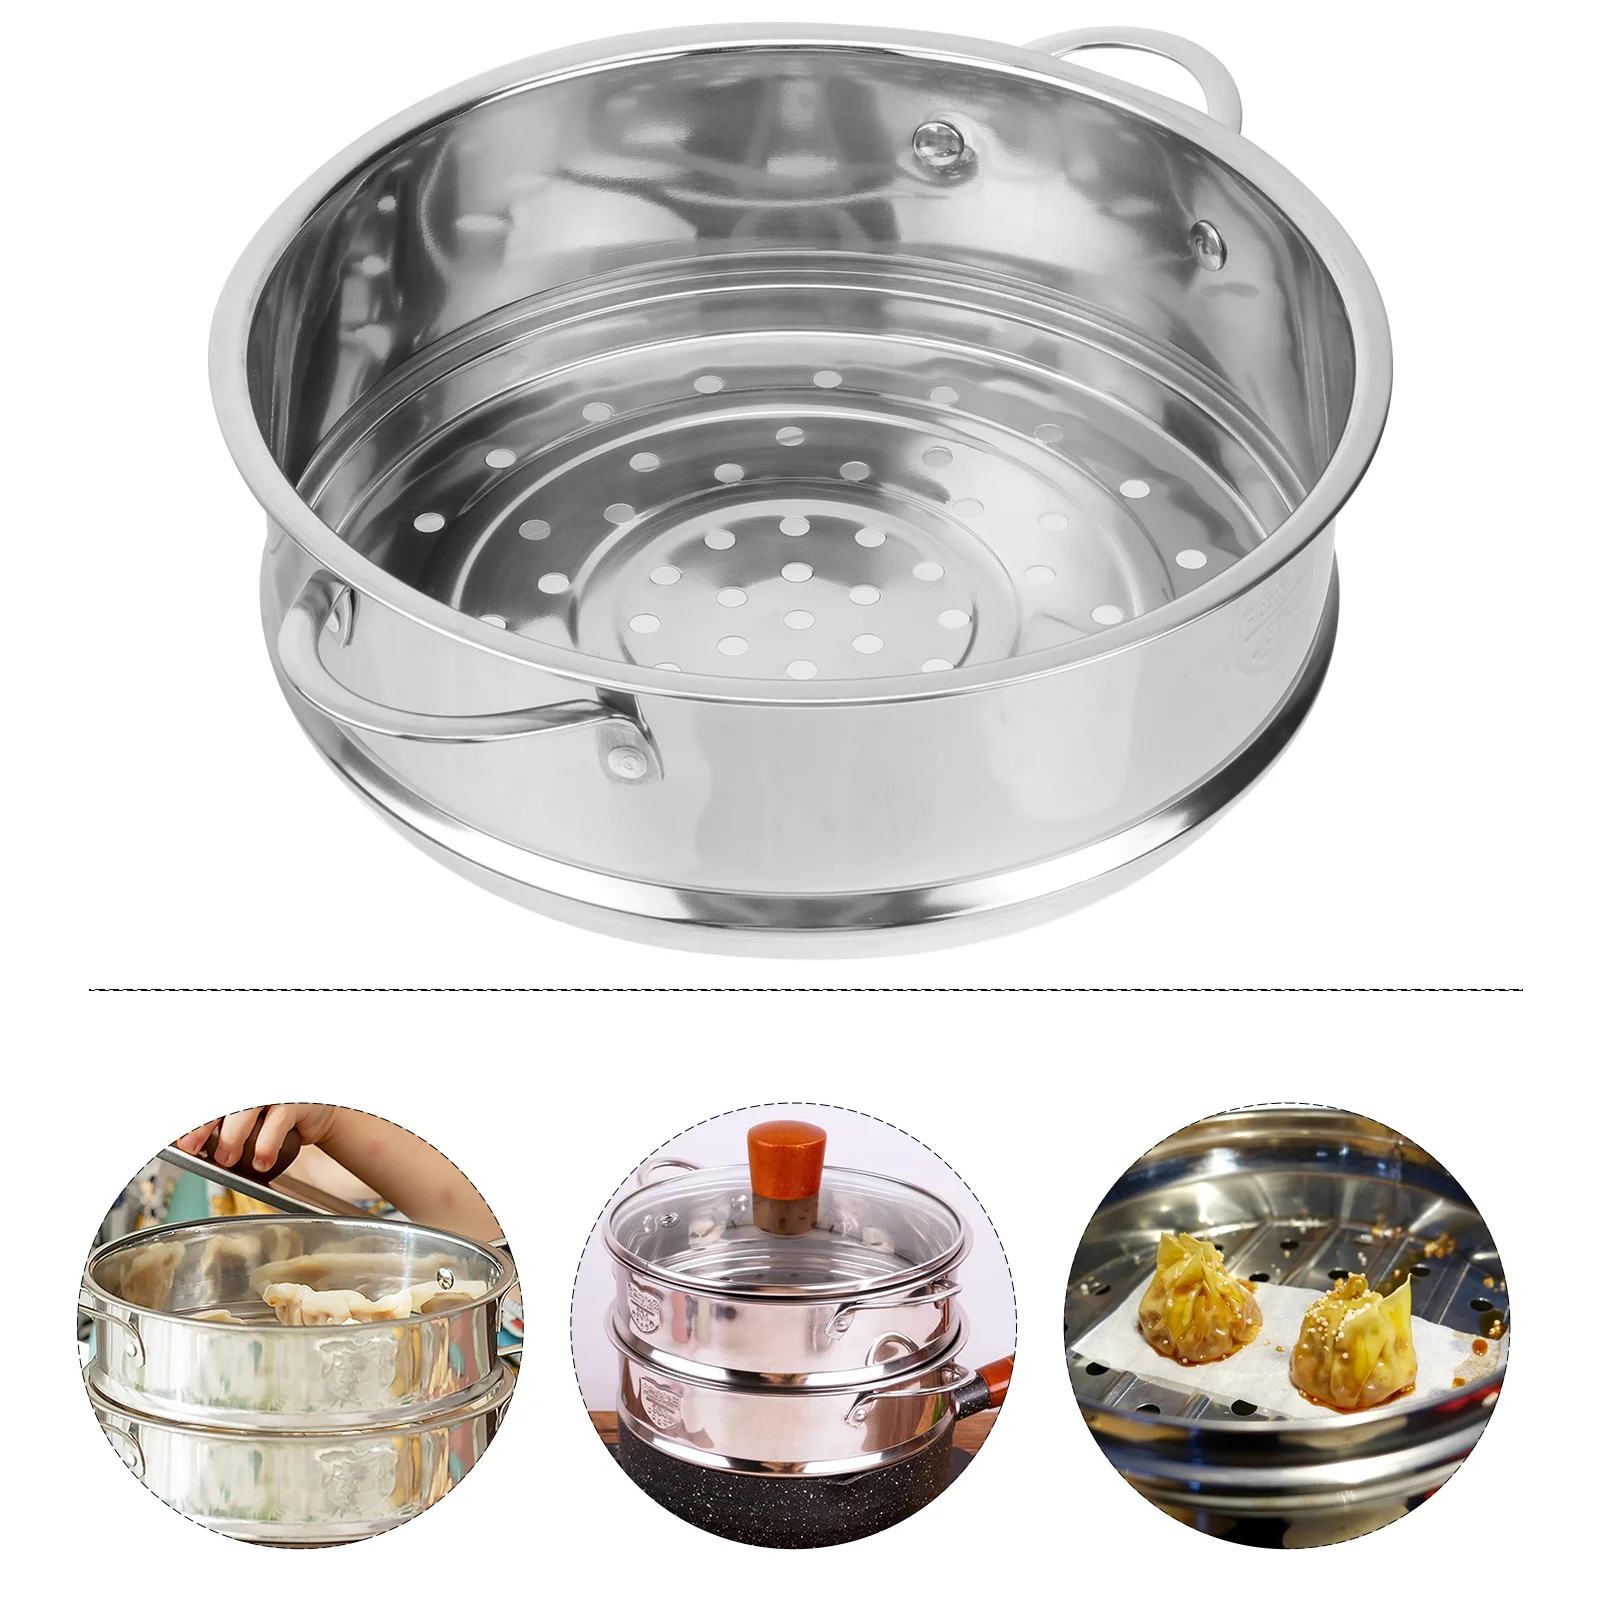 

Food Steamer Round Basket 16cm 18cm 20cm 22Cm Stainless Steel Steam Rack Compatible with Instant Pot